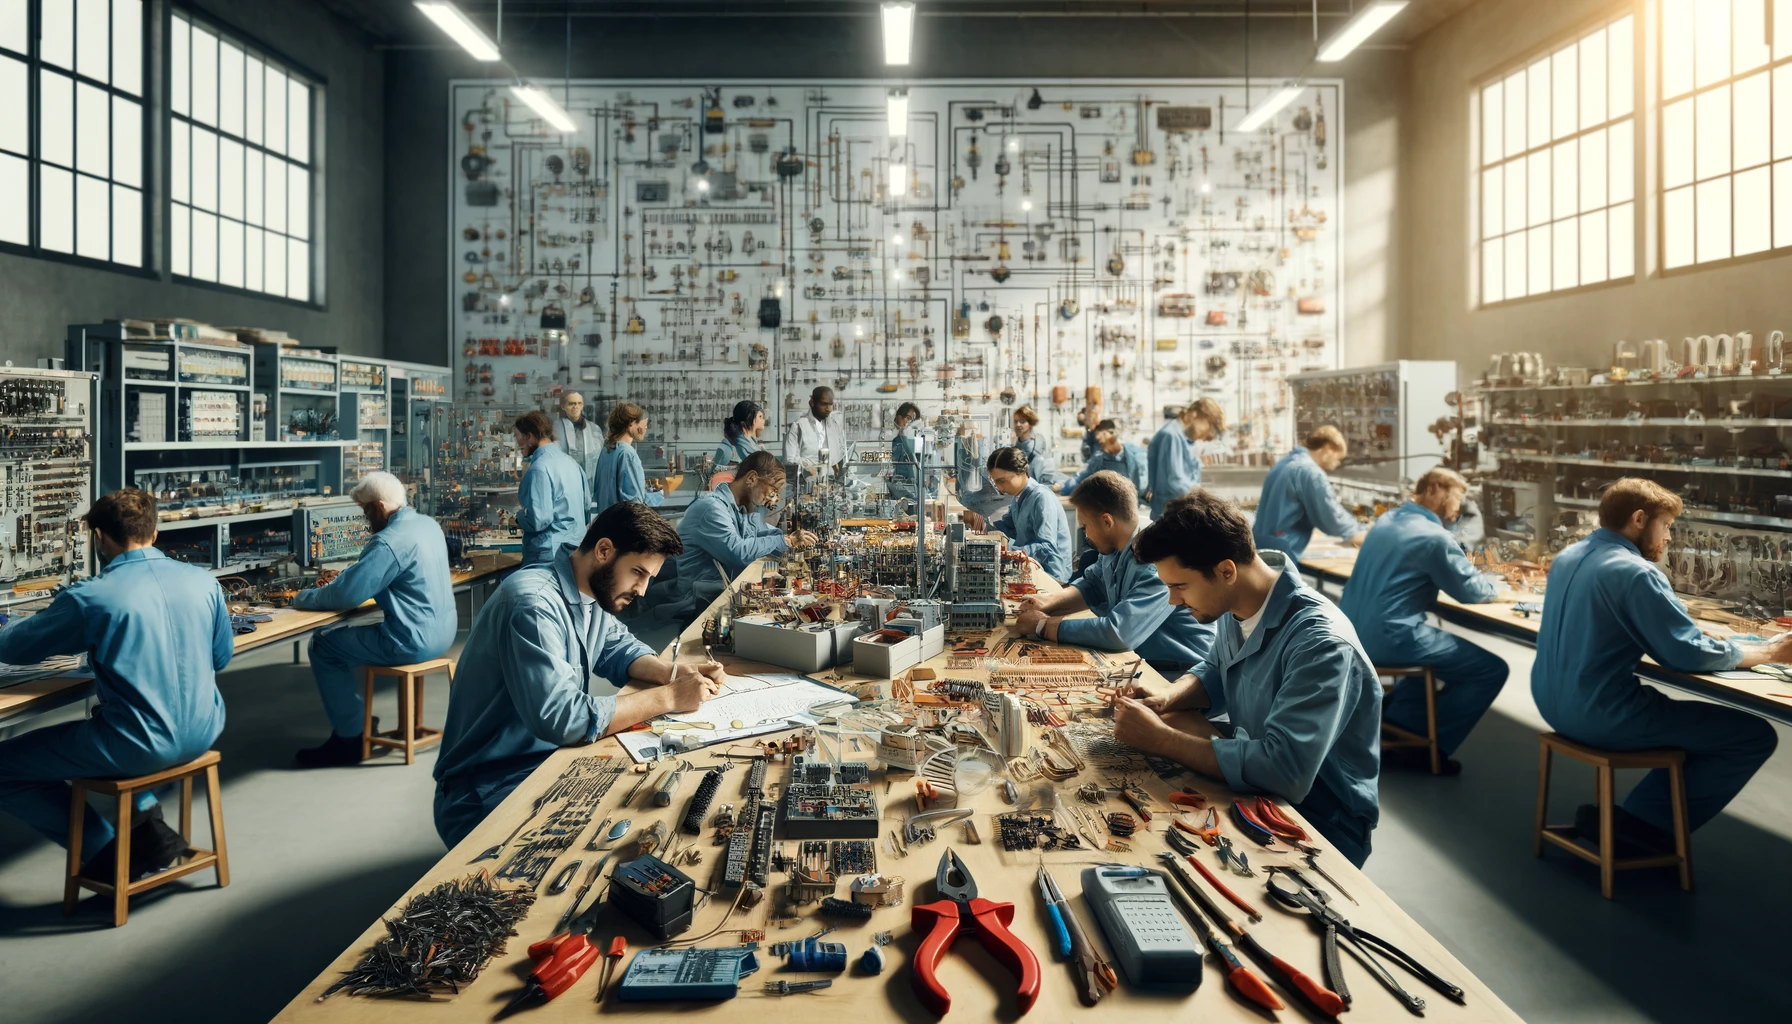 Photorealistic image of a busy electrical workshop with diverse electricians in blue uniforms working on various projects. The room is filled with electrical tools, circuits, and diagrams, creating a highly organized and efficient workspace.